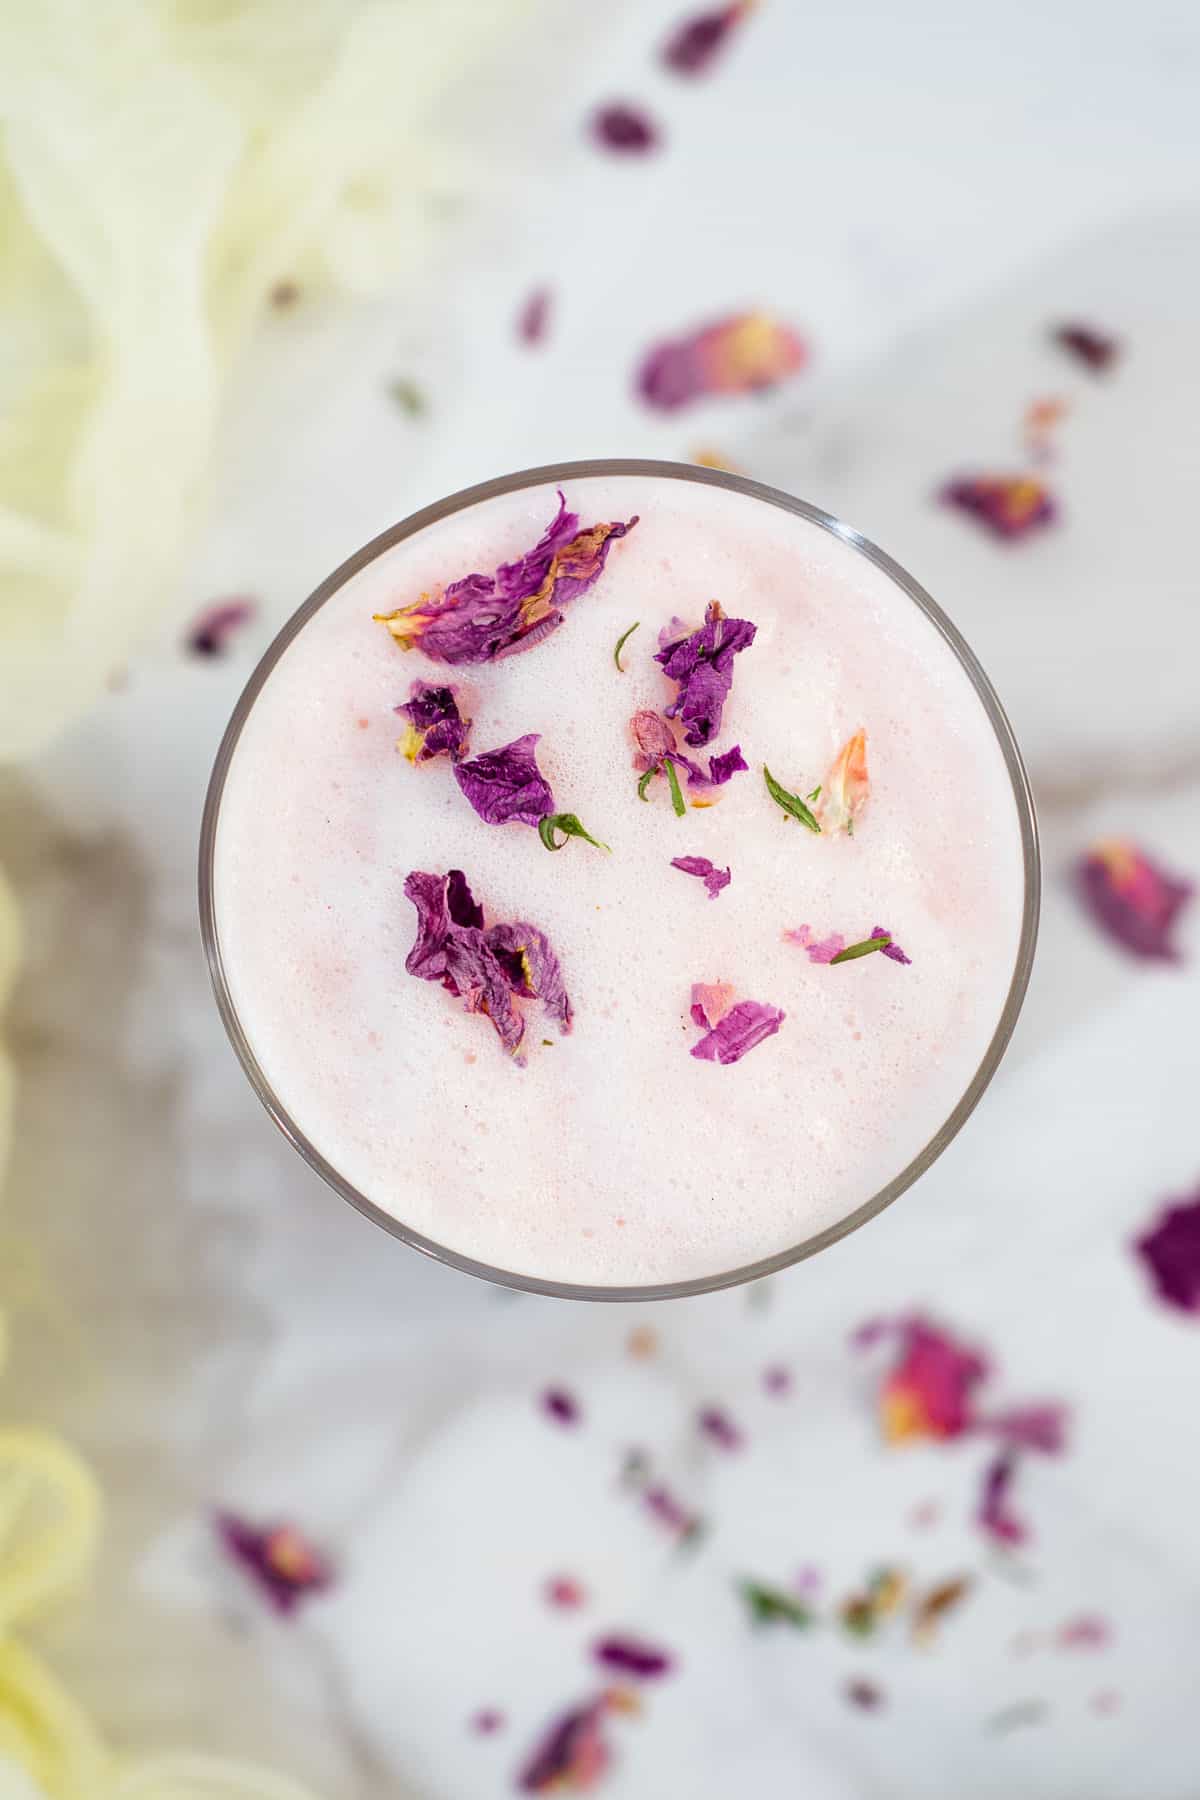 Top view of a glass of pink milk with pink rose flakes.